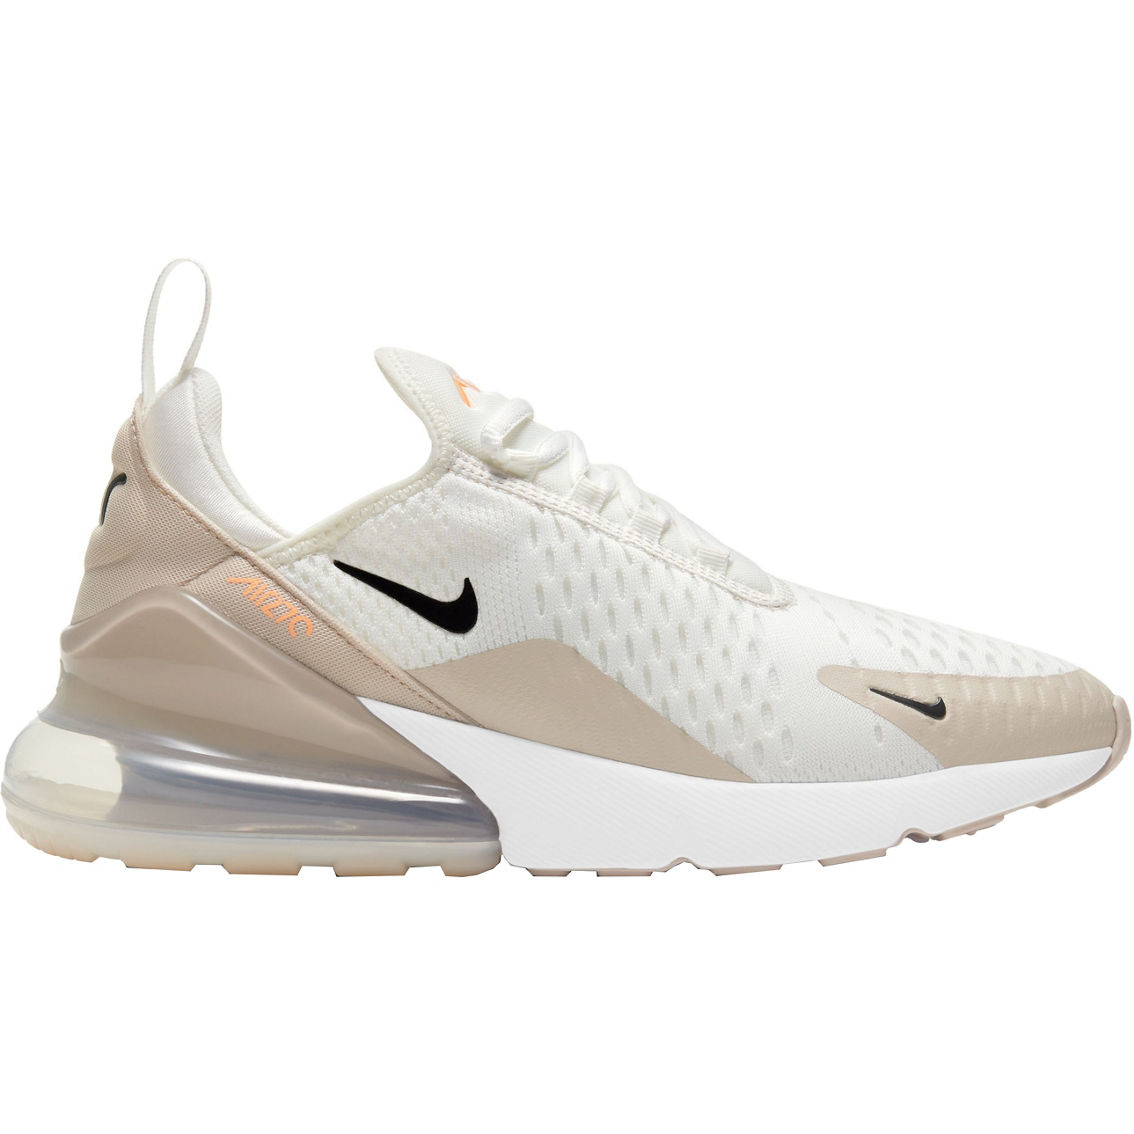 Nike Women's Air Max 270 Running Shoes - Image 2 of 8